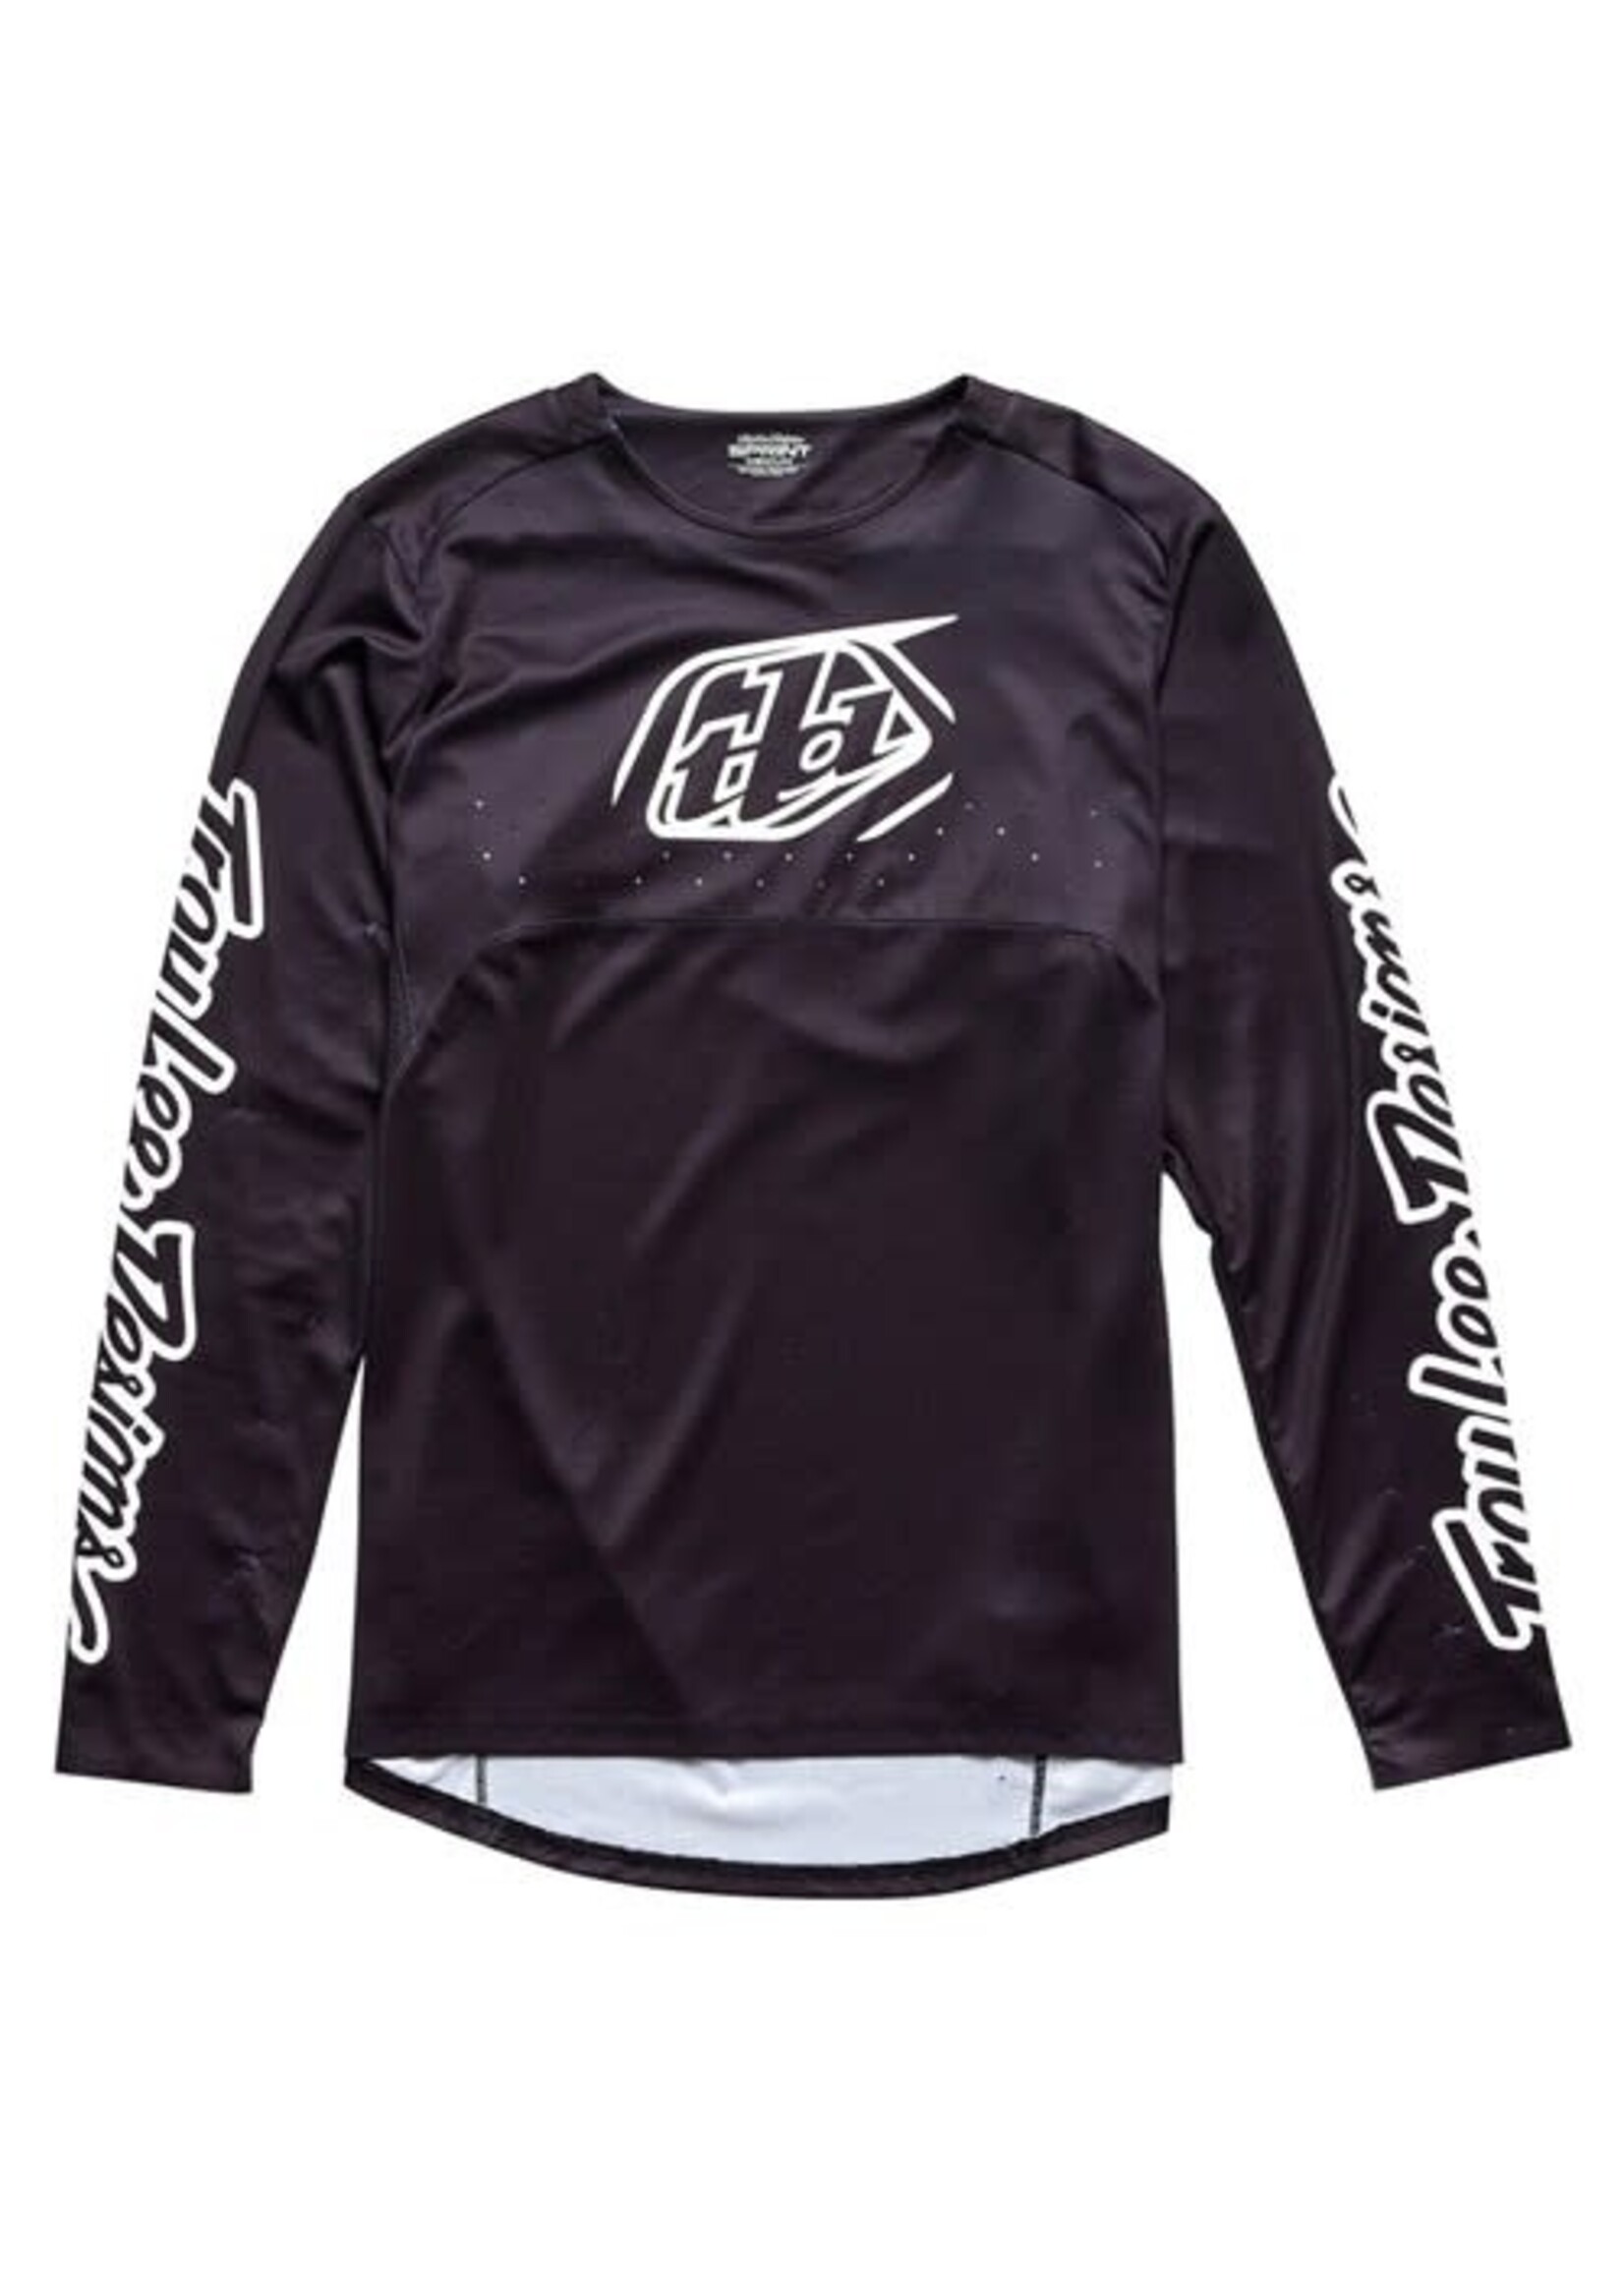 Troylee Designs Jersey TLD 24.1 Sprint Icon Youth